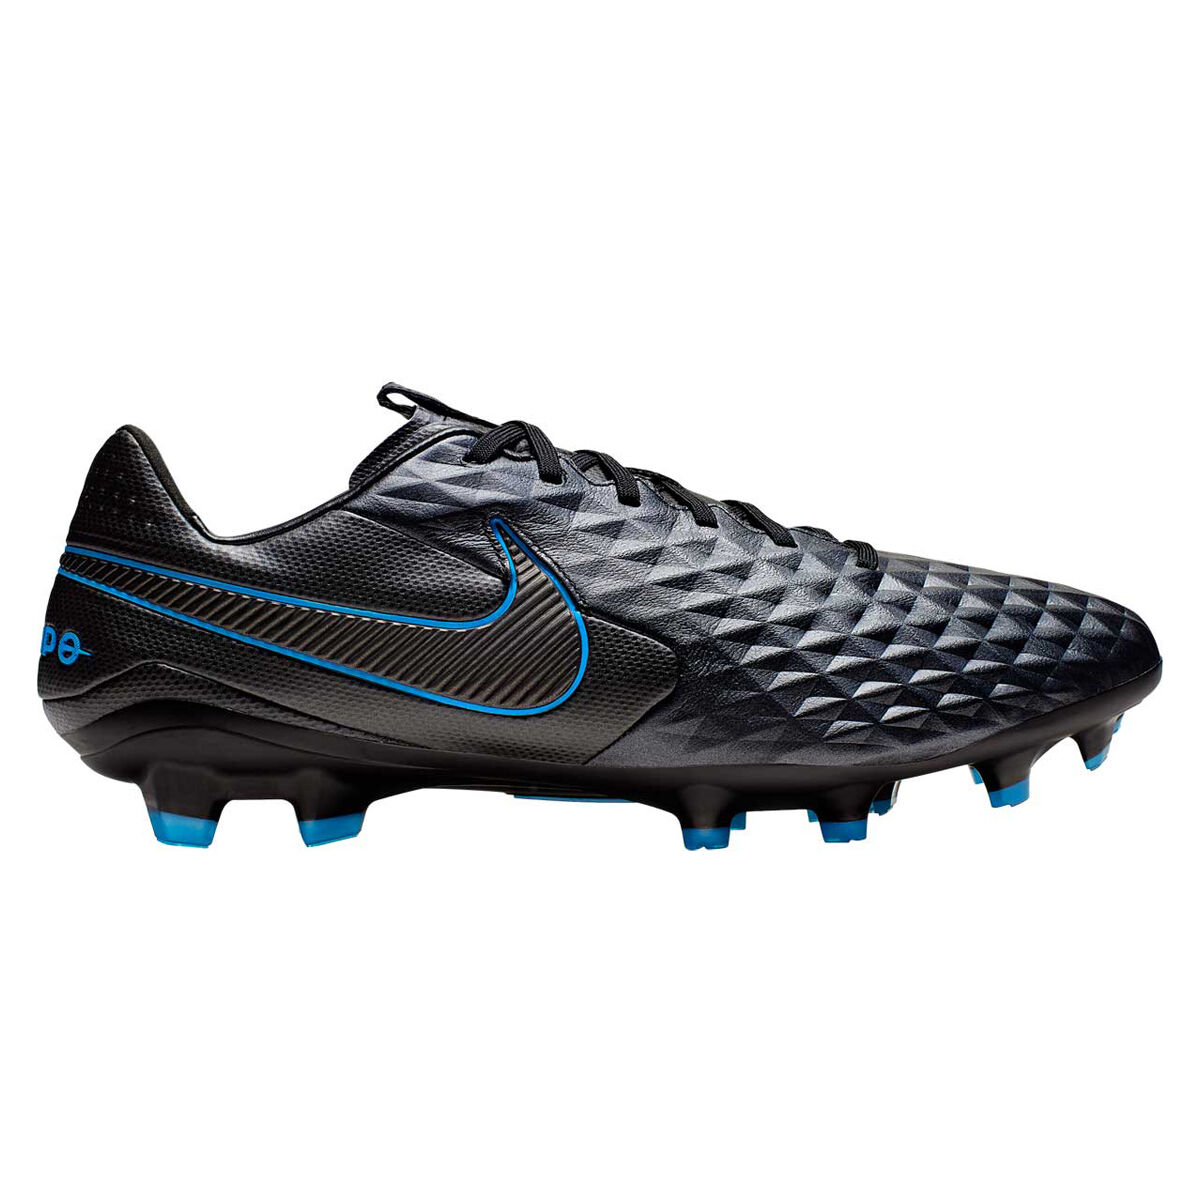 nike football boots offers